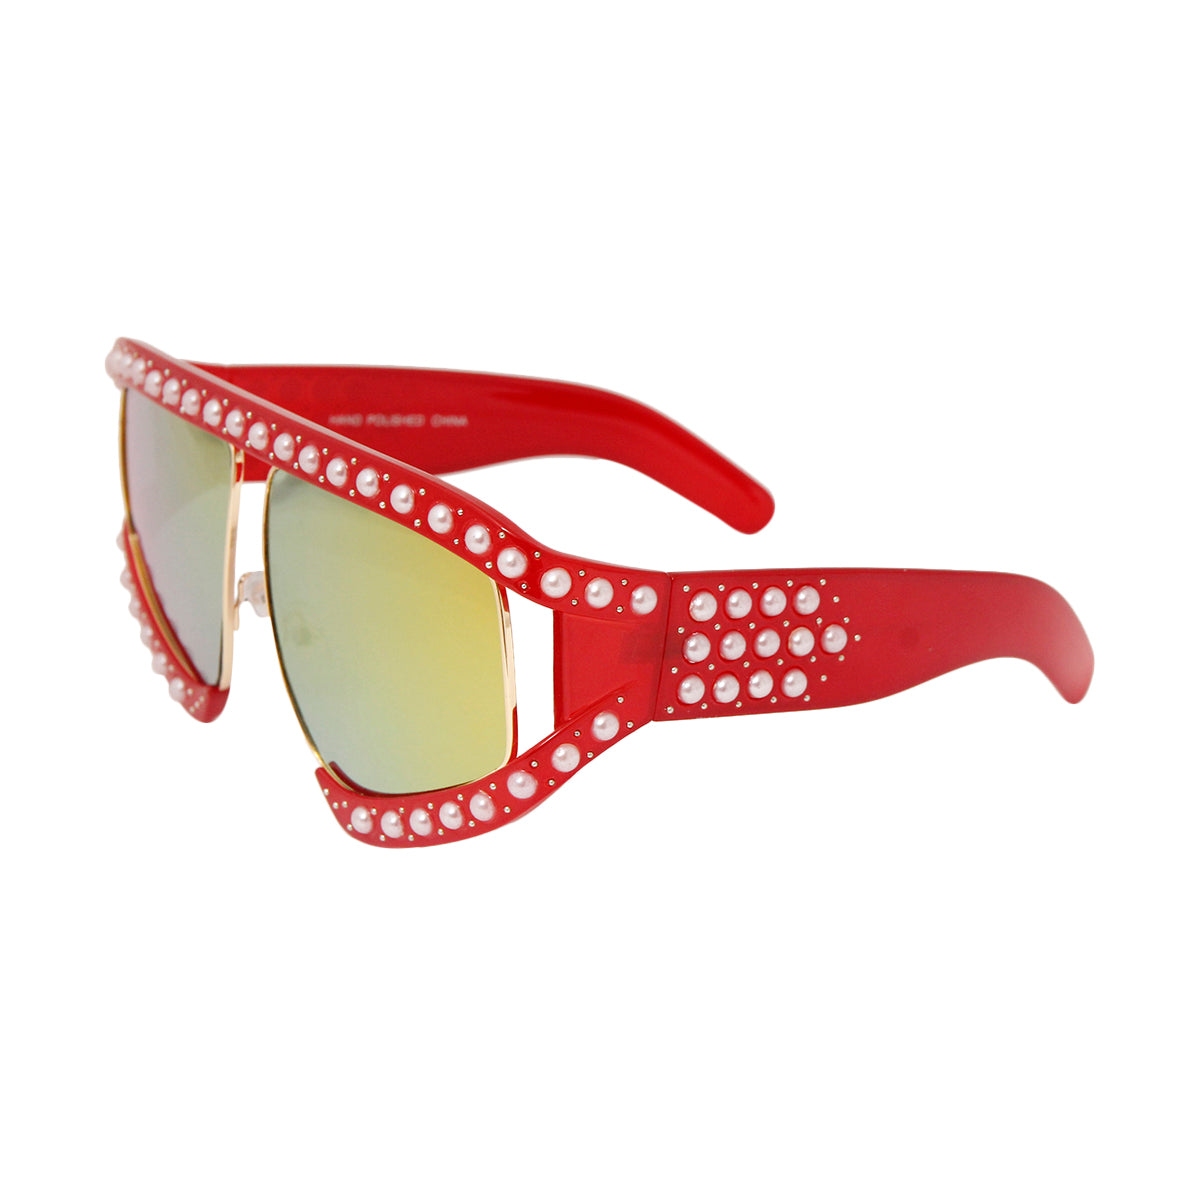 Red and Pearl Sunglasses